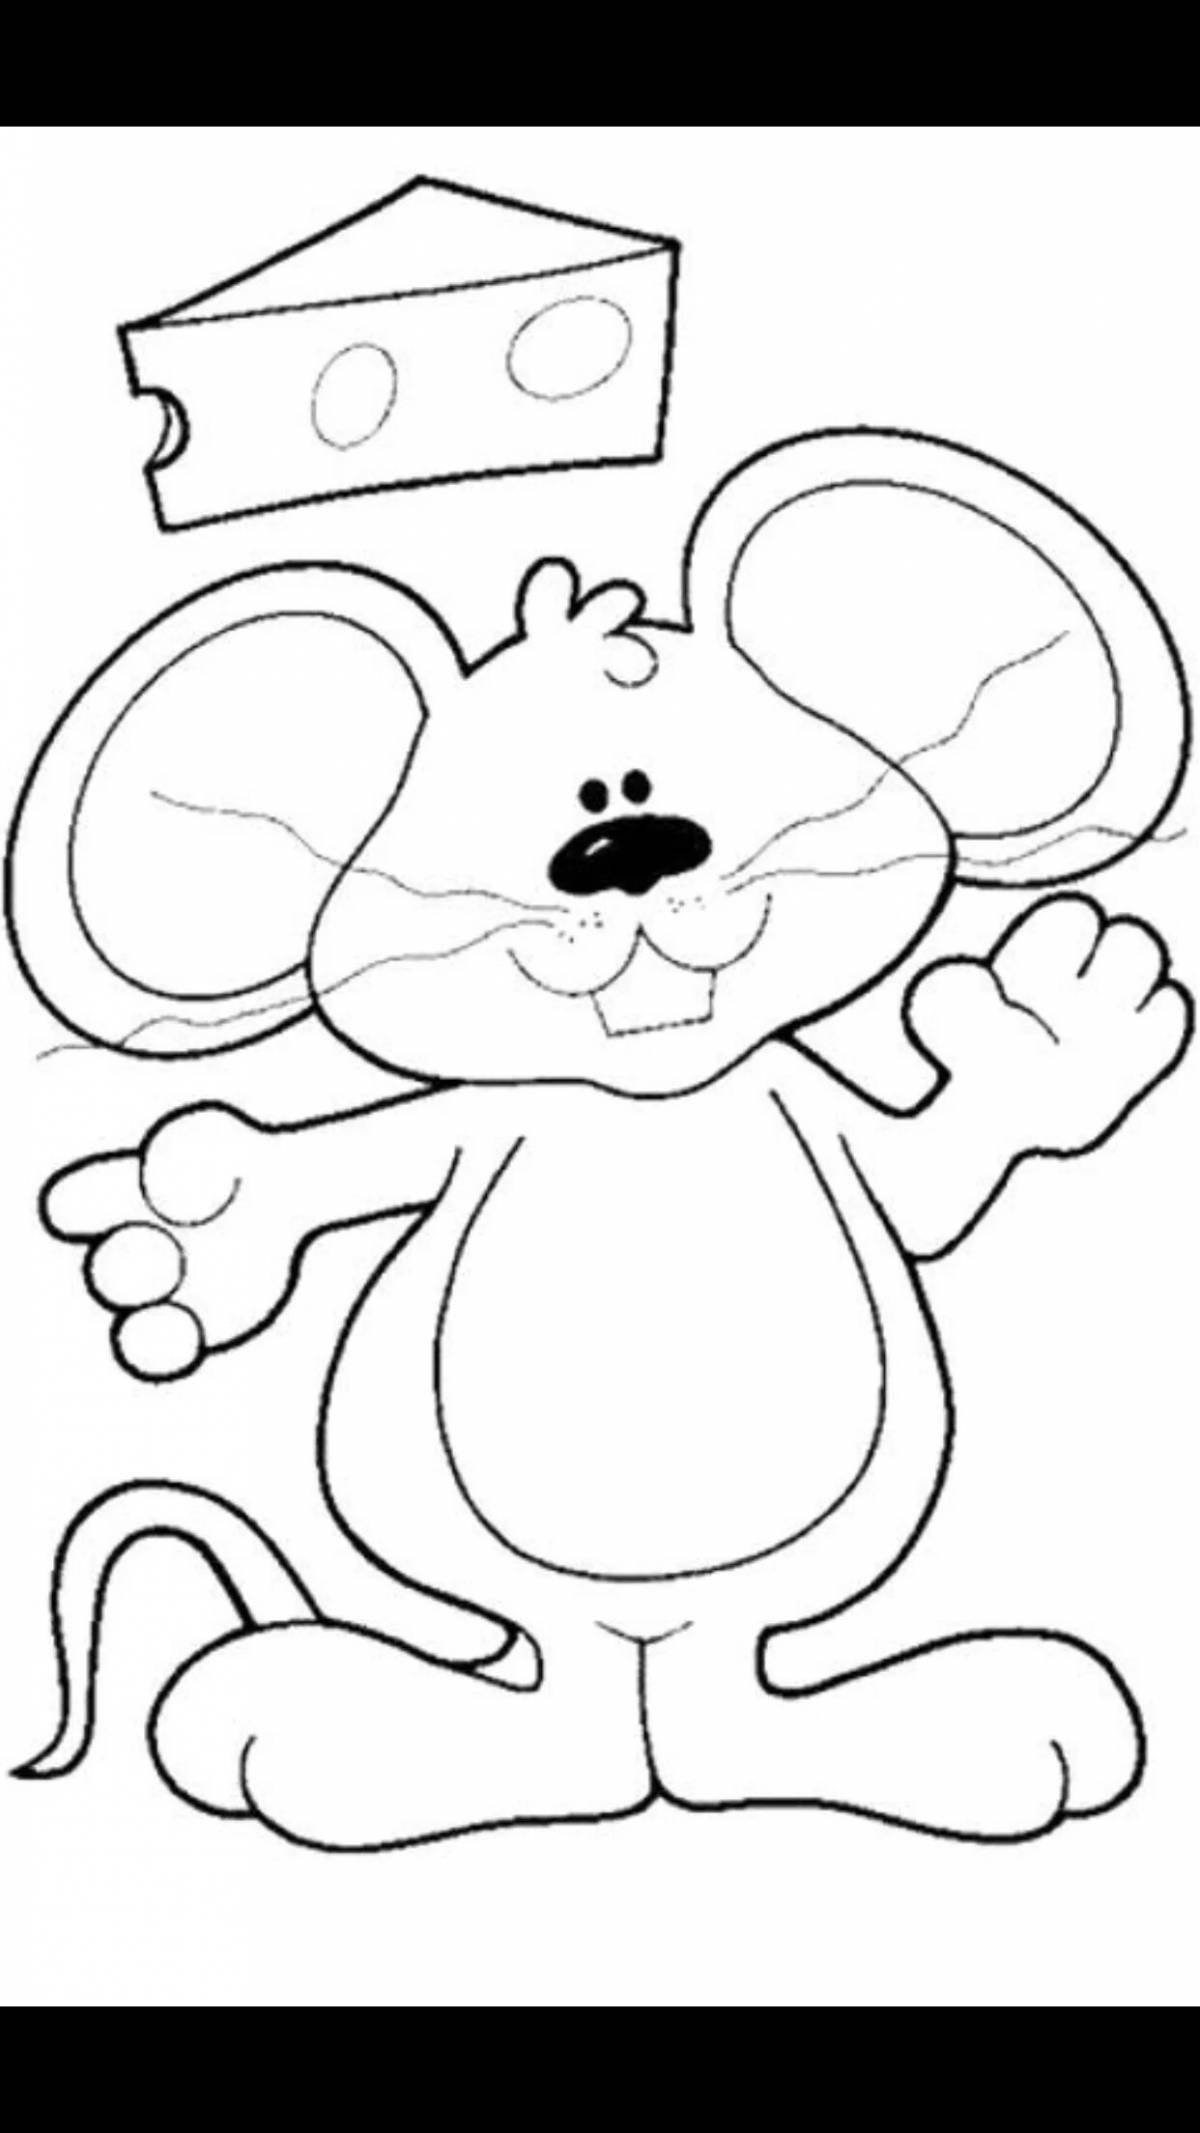 Colorful mice coloring pages for kids